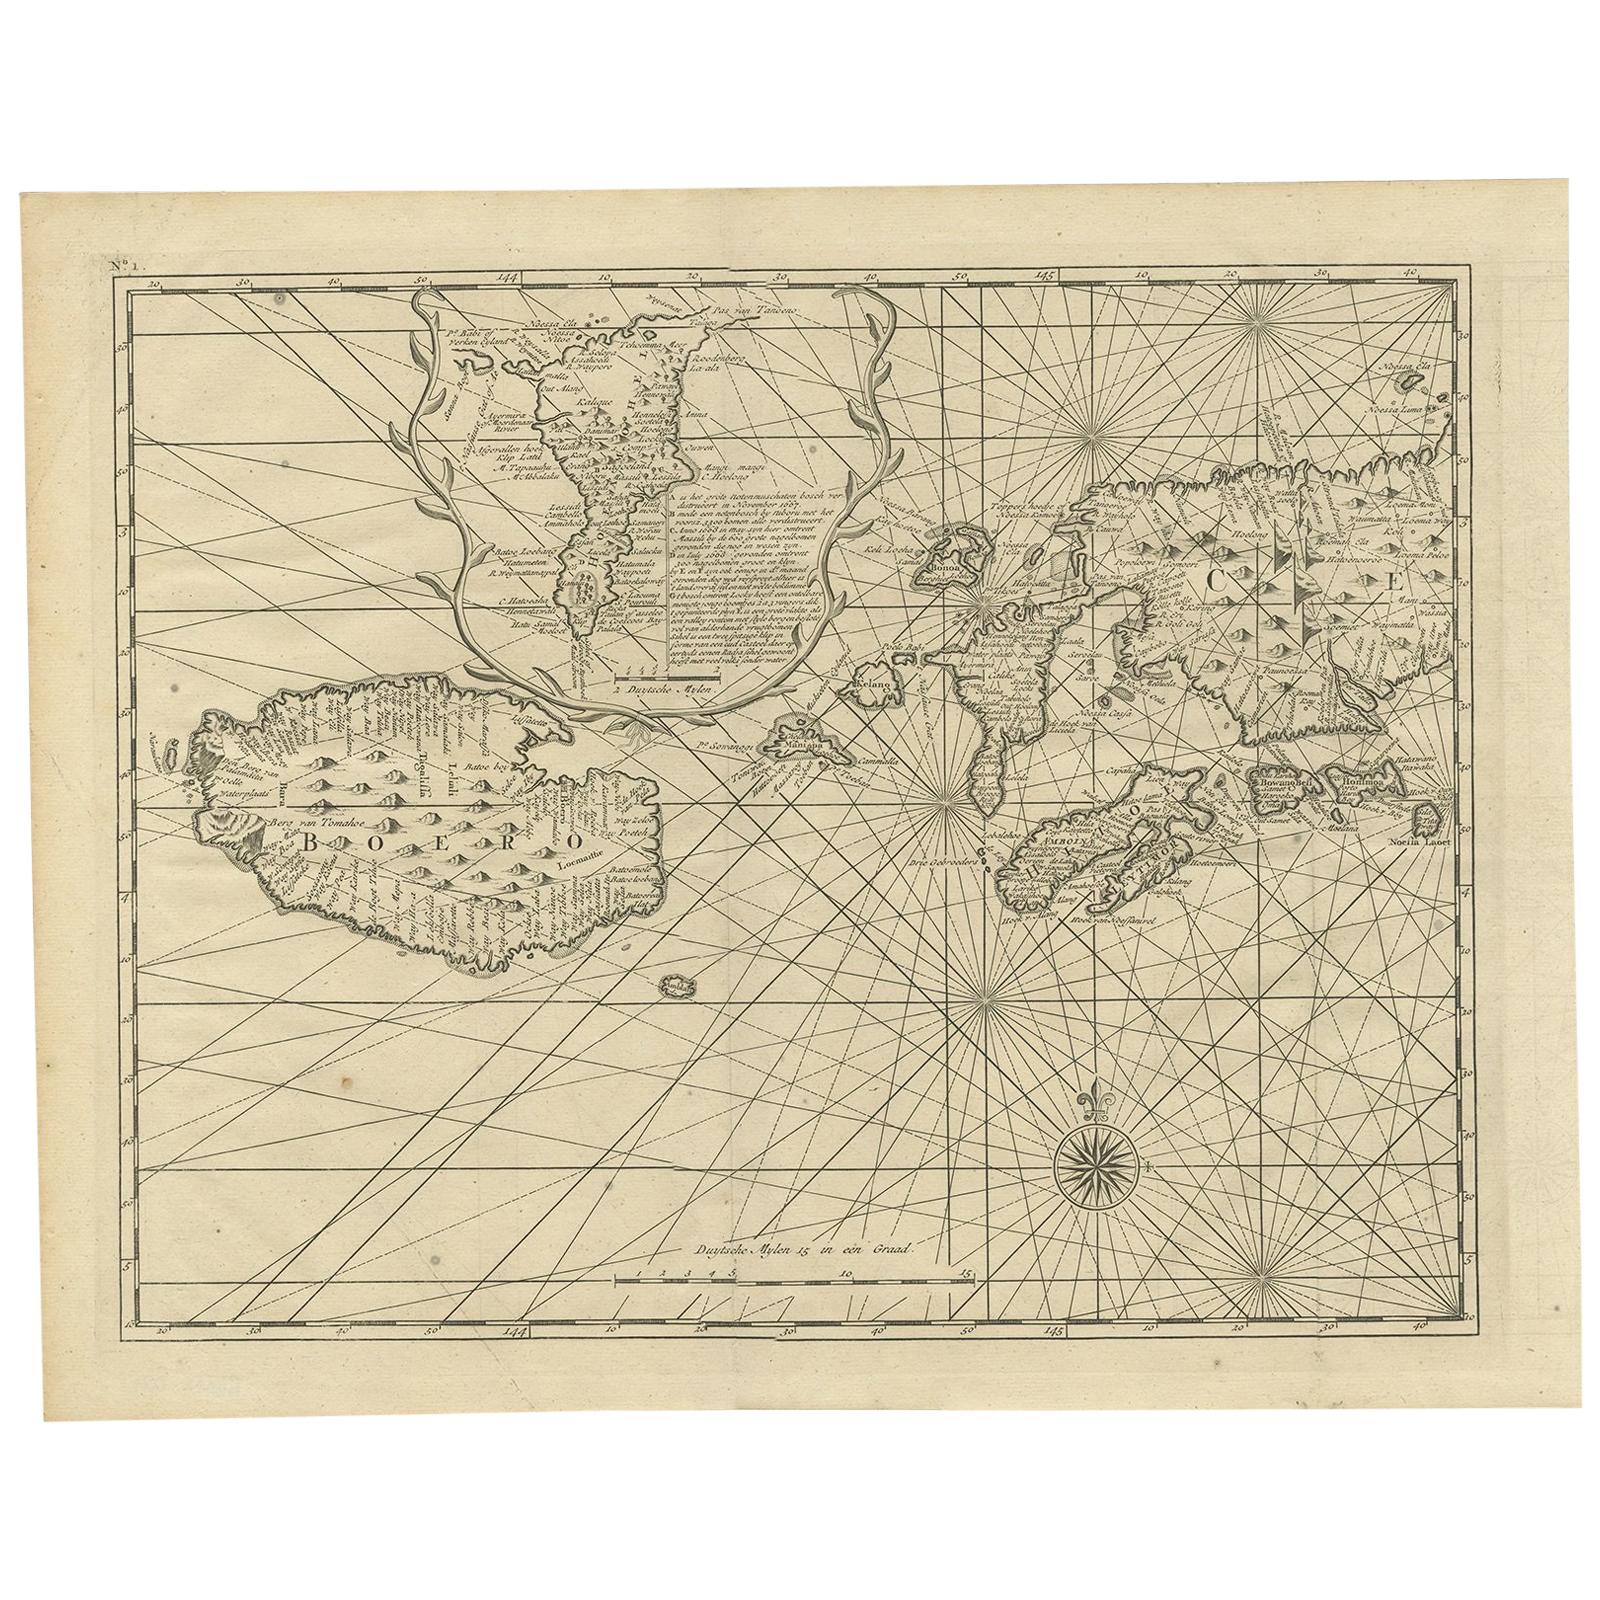 Antique Map of Ambon and Boero by Valentijn, 1726